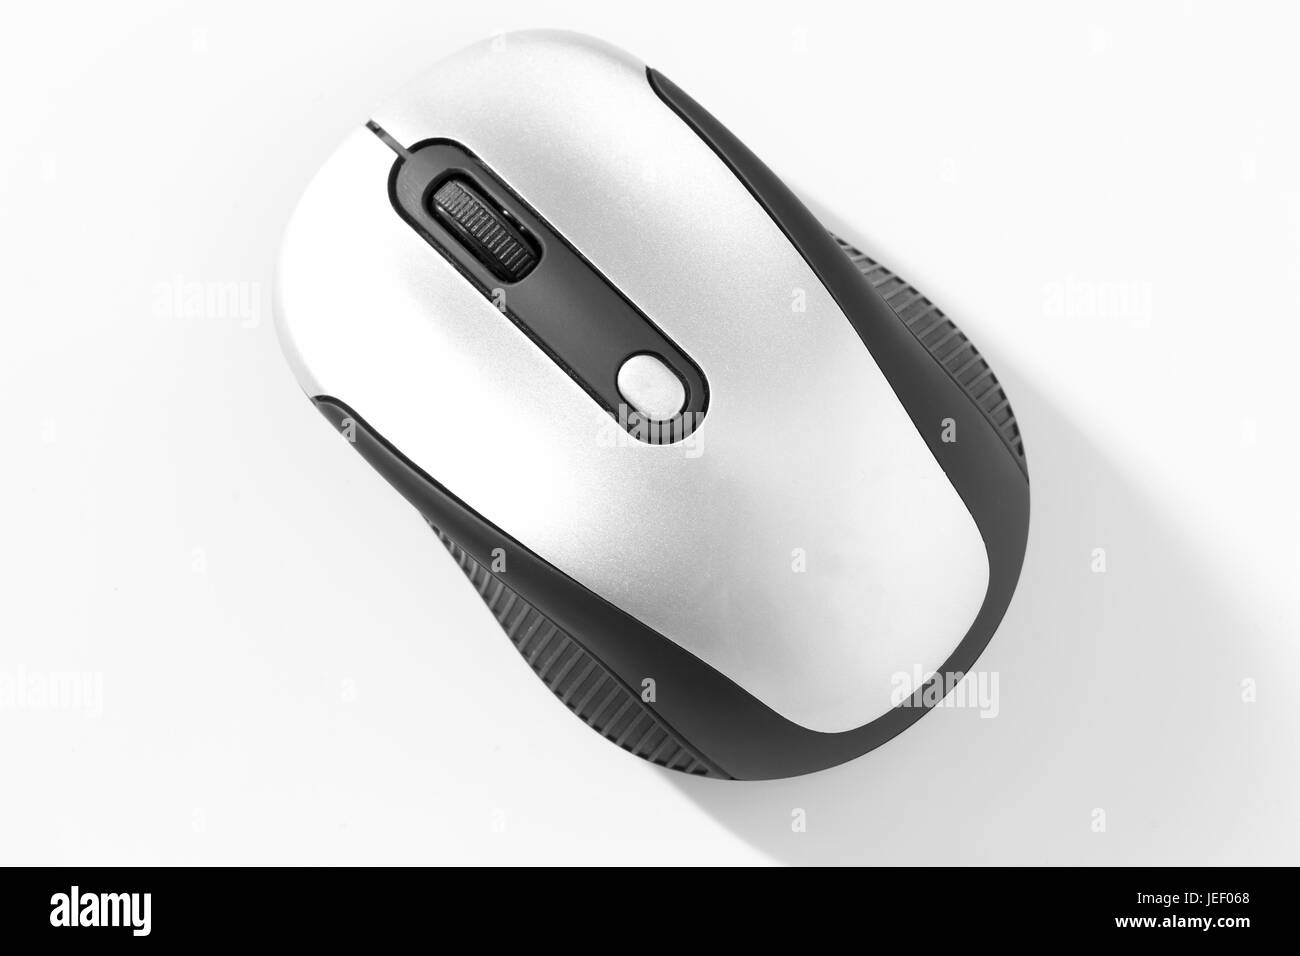 The classic computer mouse close up on a white background. Stock Photo